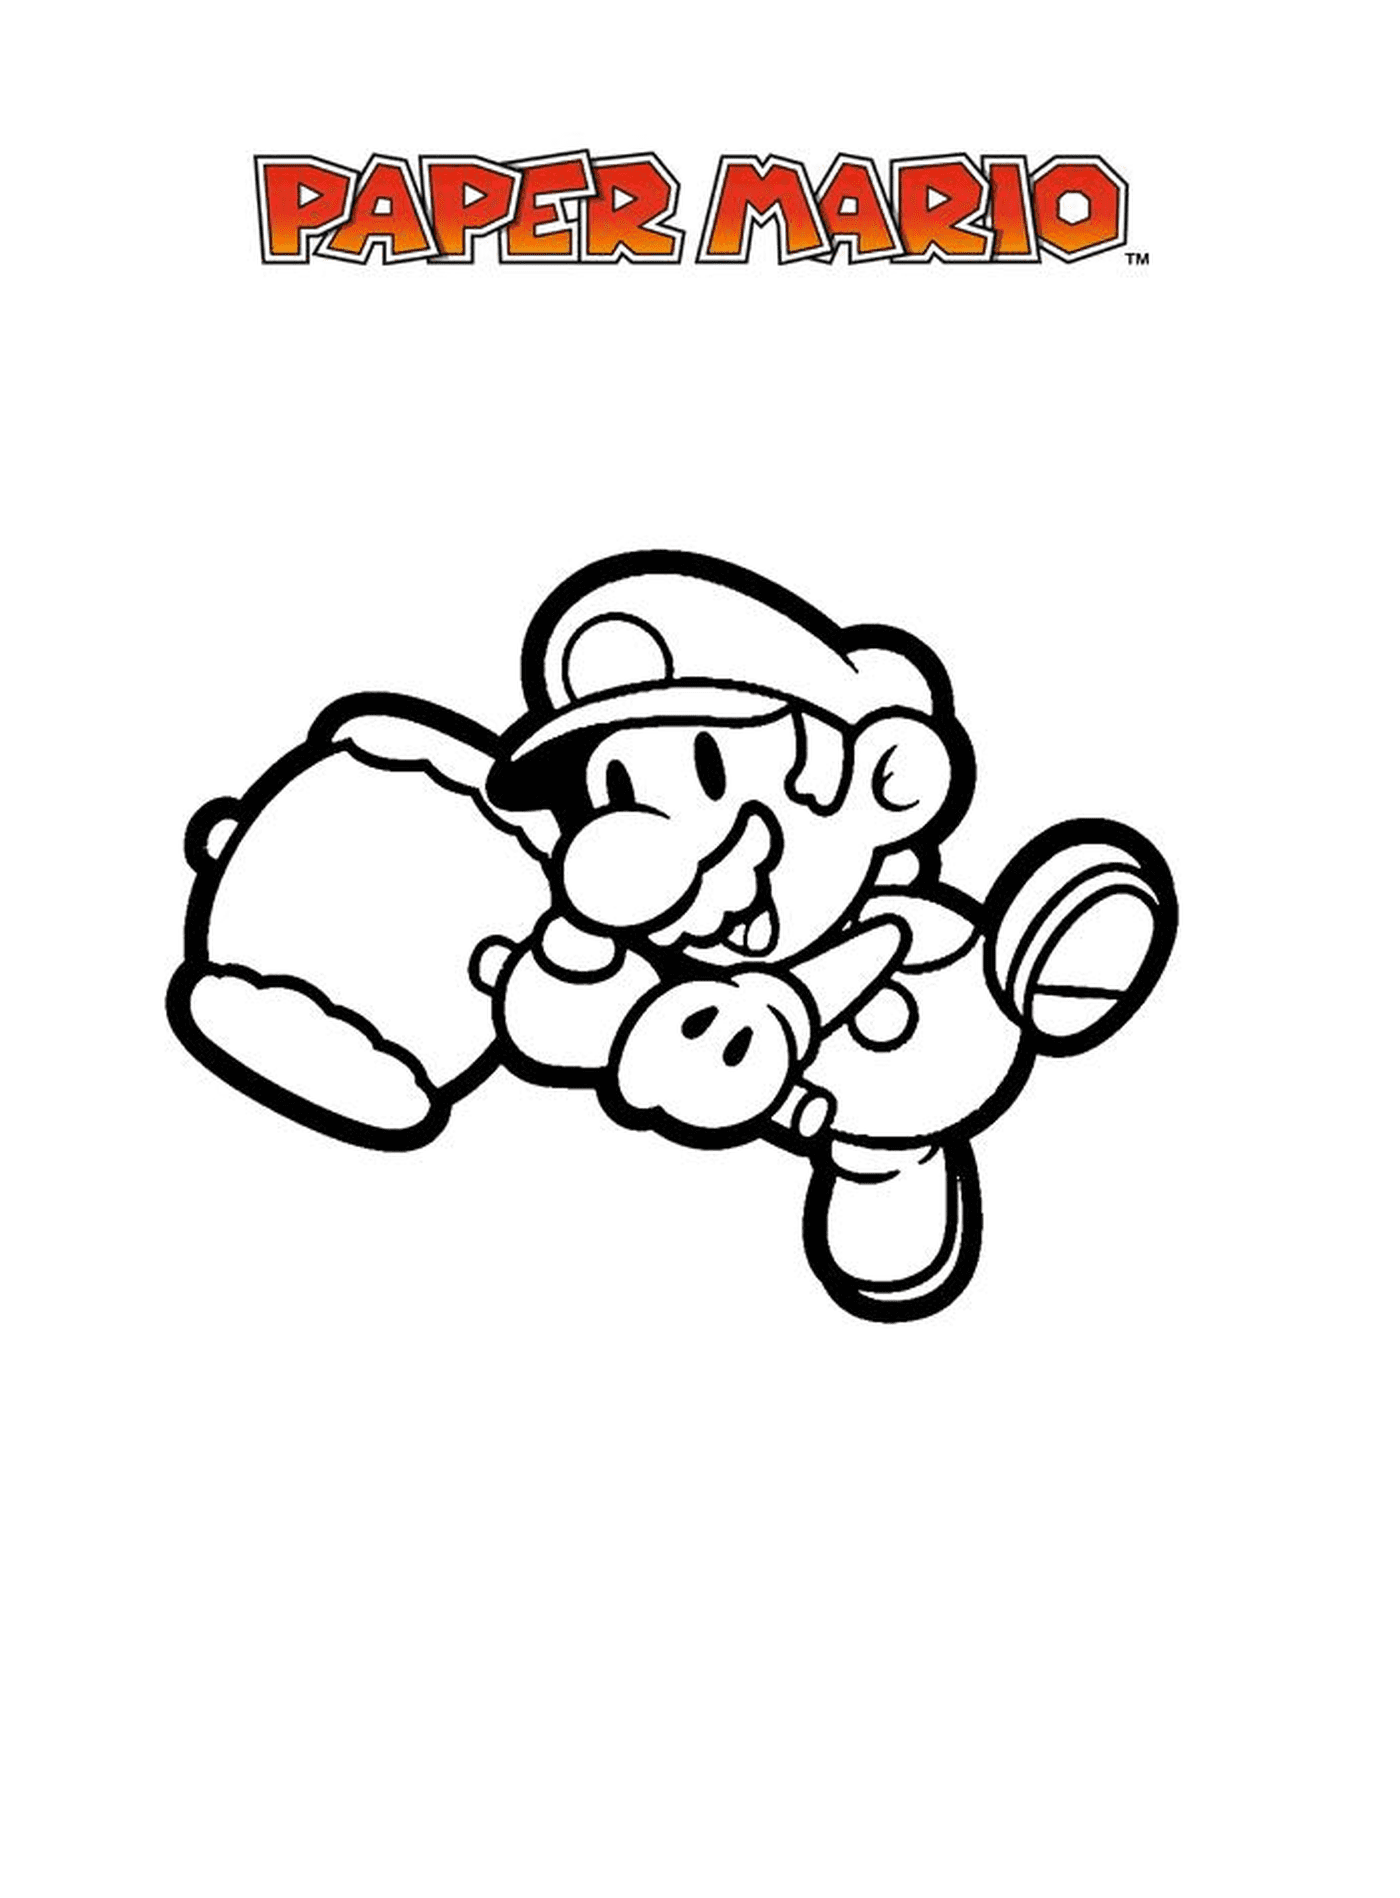  Mario holds a glove 